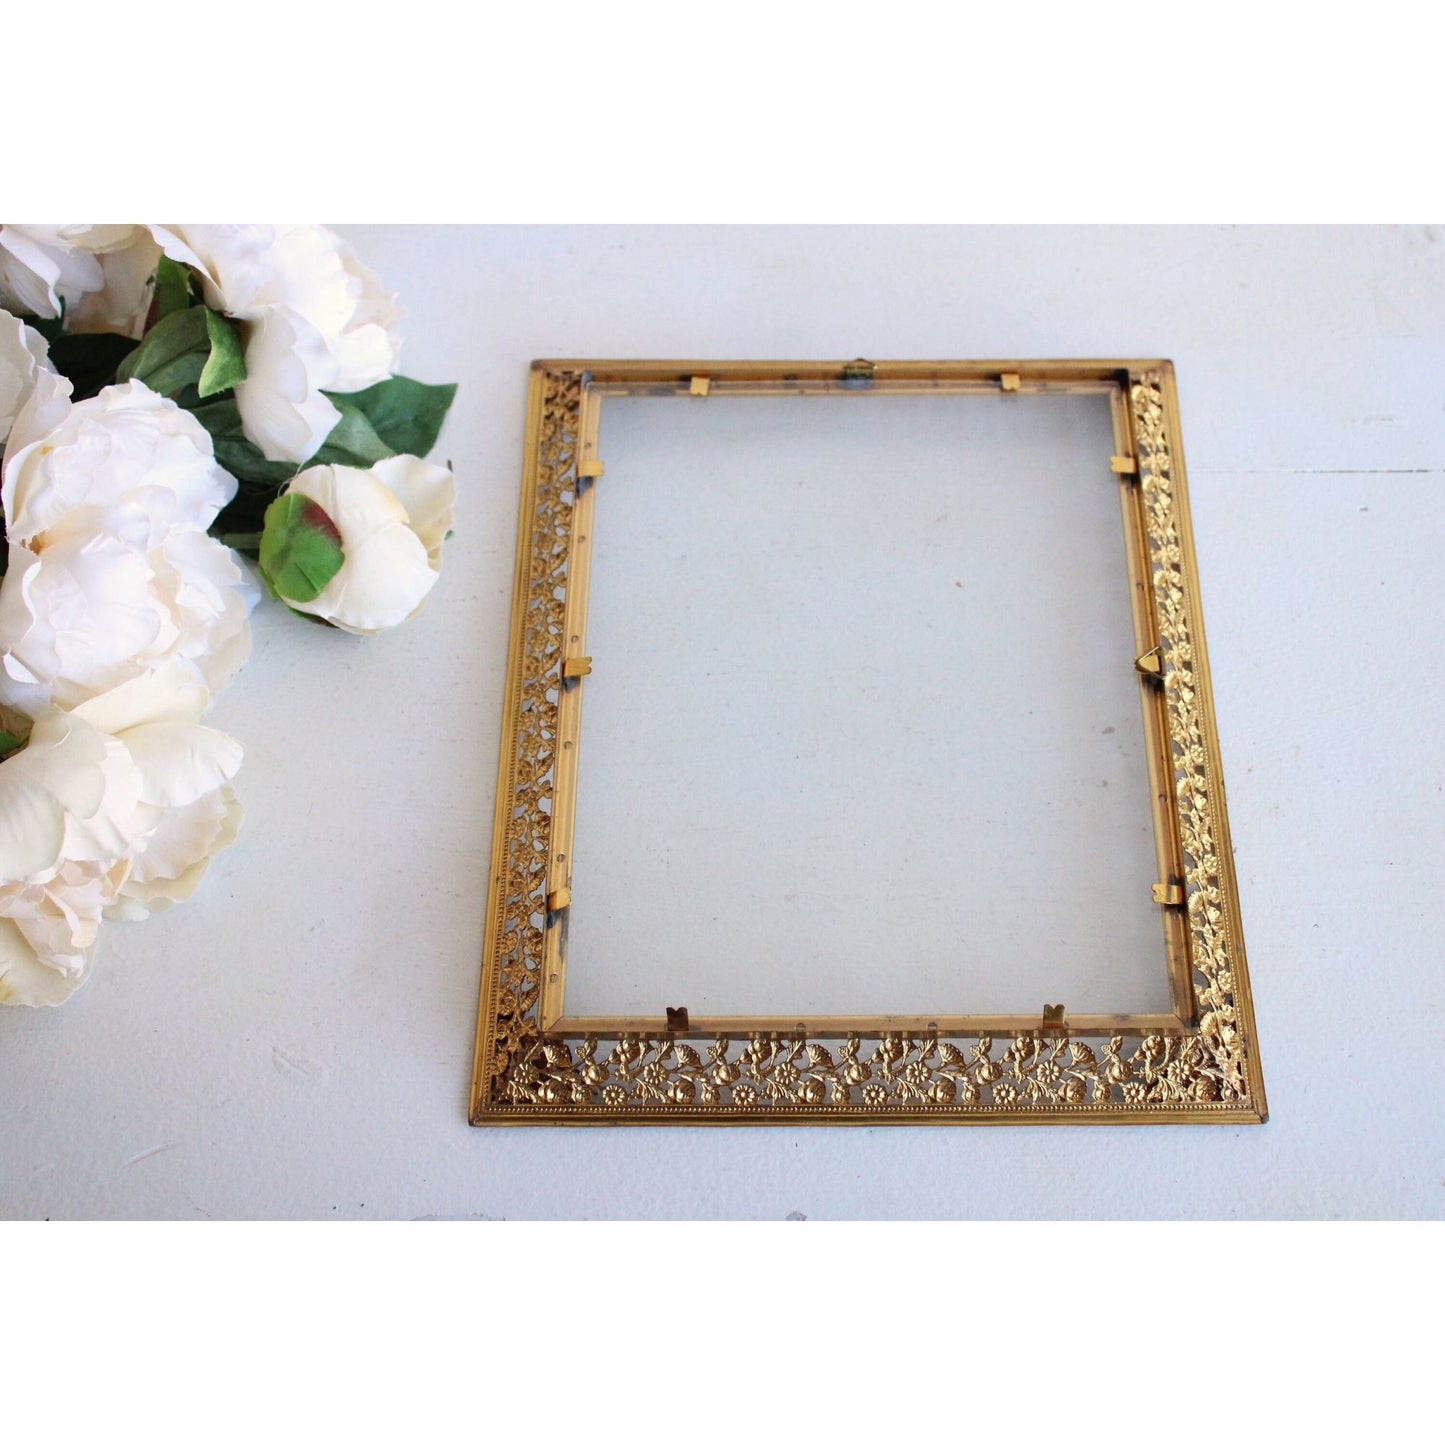 Vintage 1940s 1950s Filigree Picture Frame with Glass